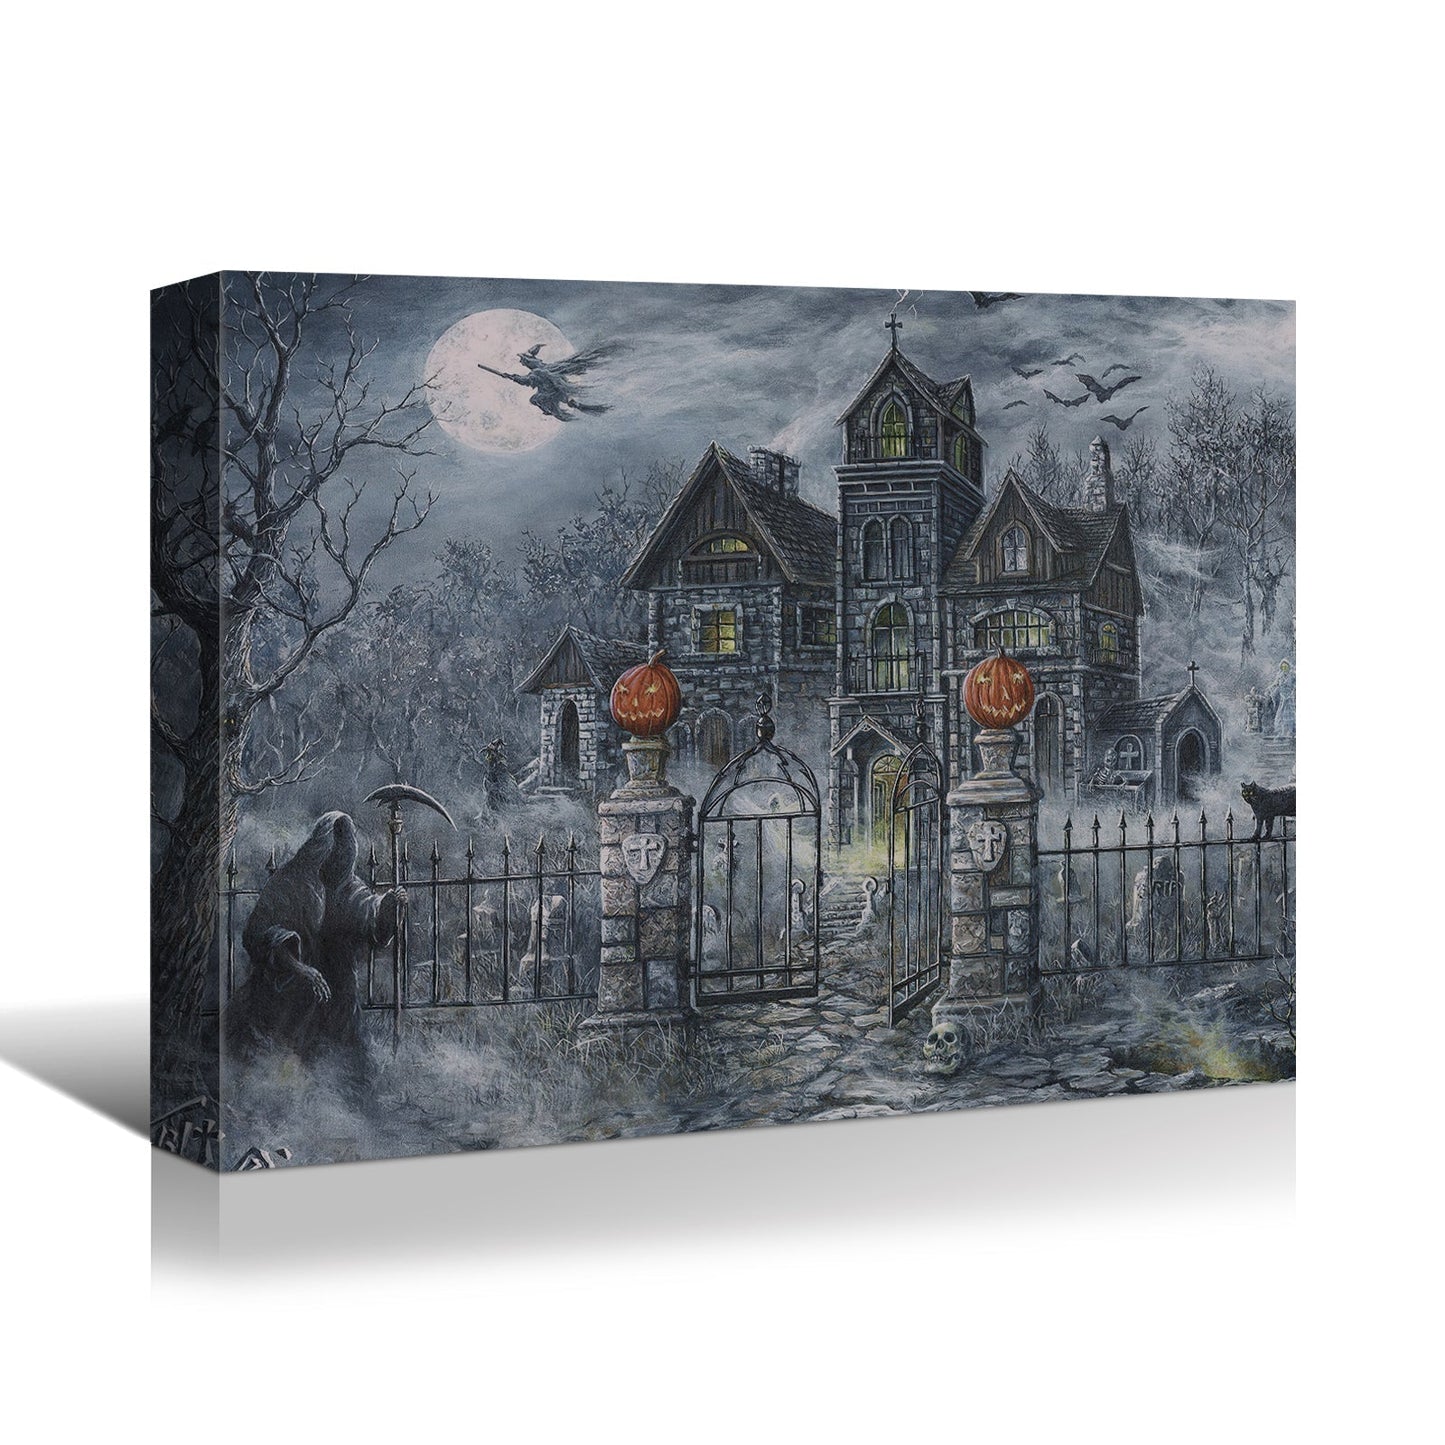 Drop-Shipping Framed Canvas Wall Art Decor Painting For Halloween, Haunted Ghost Hause Painting For Halloween Gift, Decoration For Halloween Office Living Room, Bedroom Decor-Ready To Hang